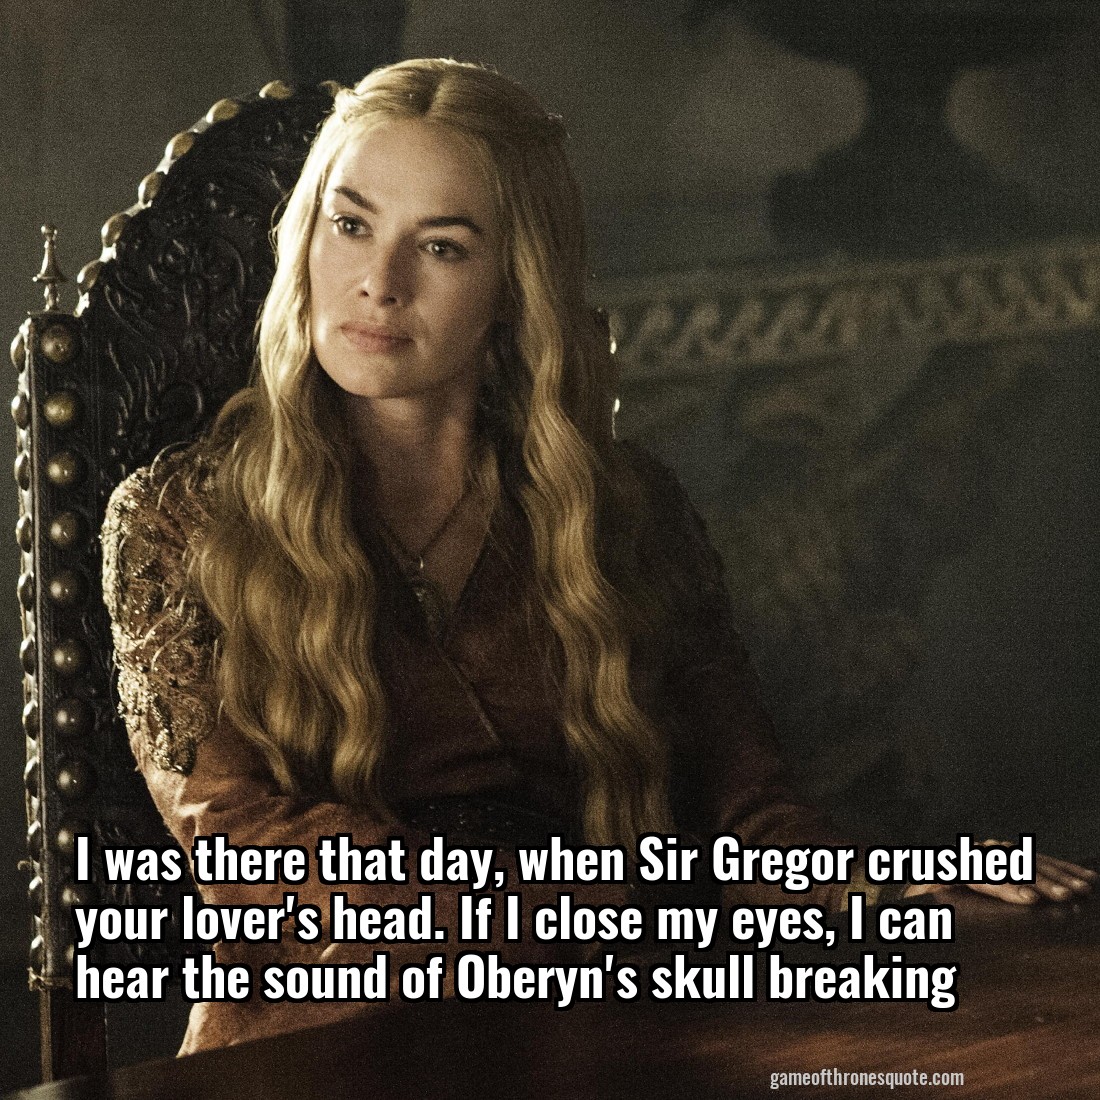 I was there that day, when Sir Gregor crushed your lover's head. If I close my eyes, I can hear the sound of Oberyn's skull breaking